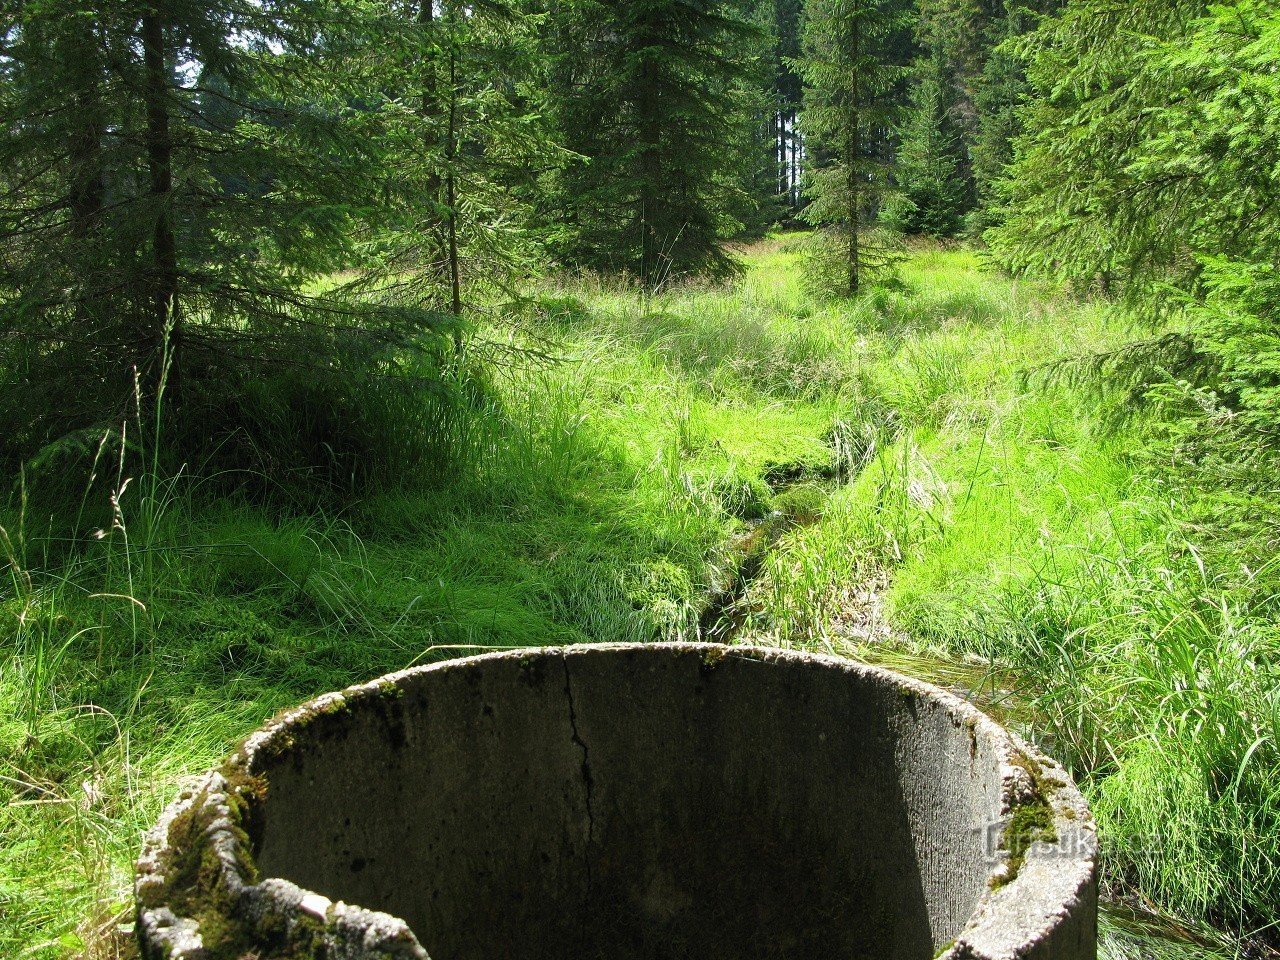 The former Rosenauer reservoir with an unsightly concrete ring